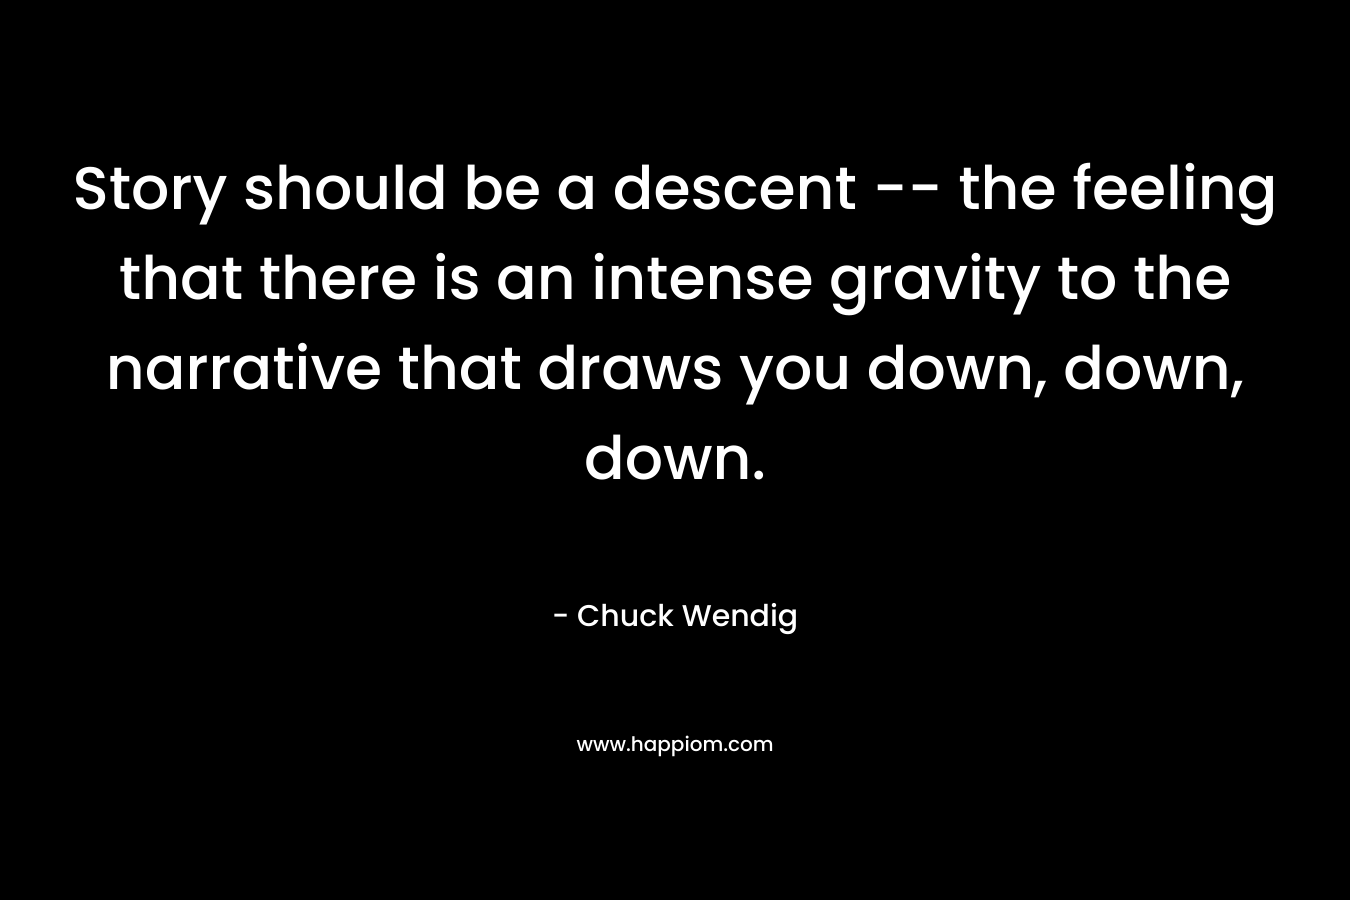 Story should be a descent — the feeling that there is an intense gravity to the narrative that draws you down, down, down. – Chuck Wendig